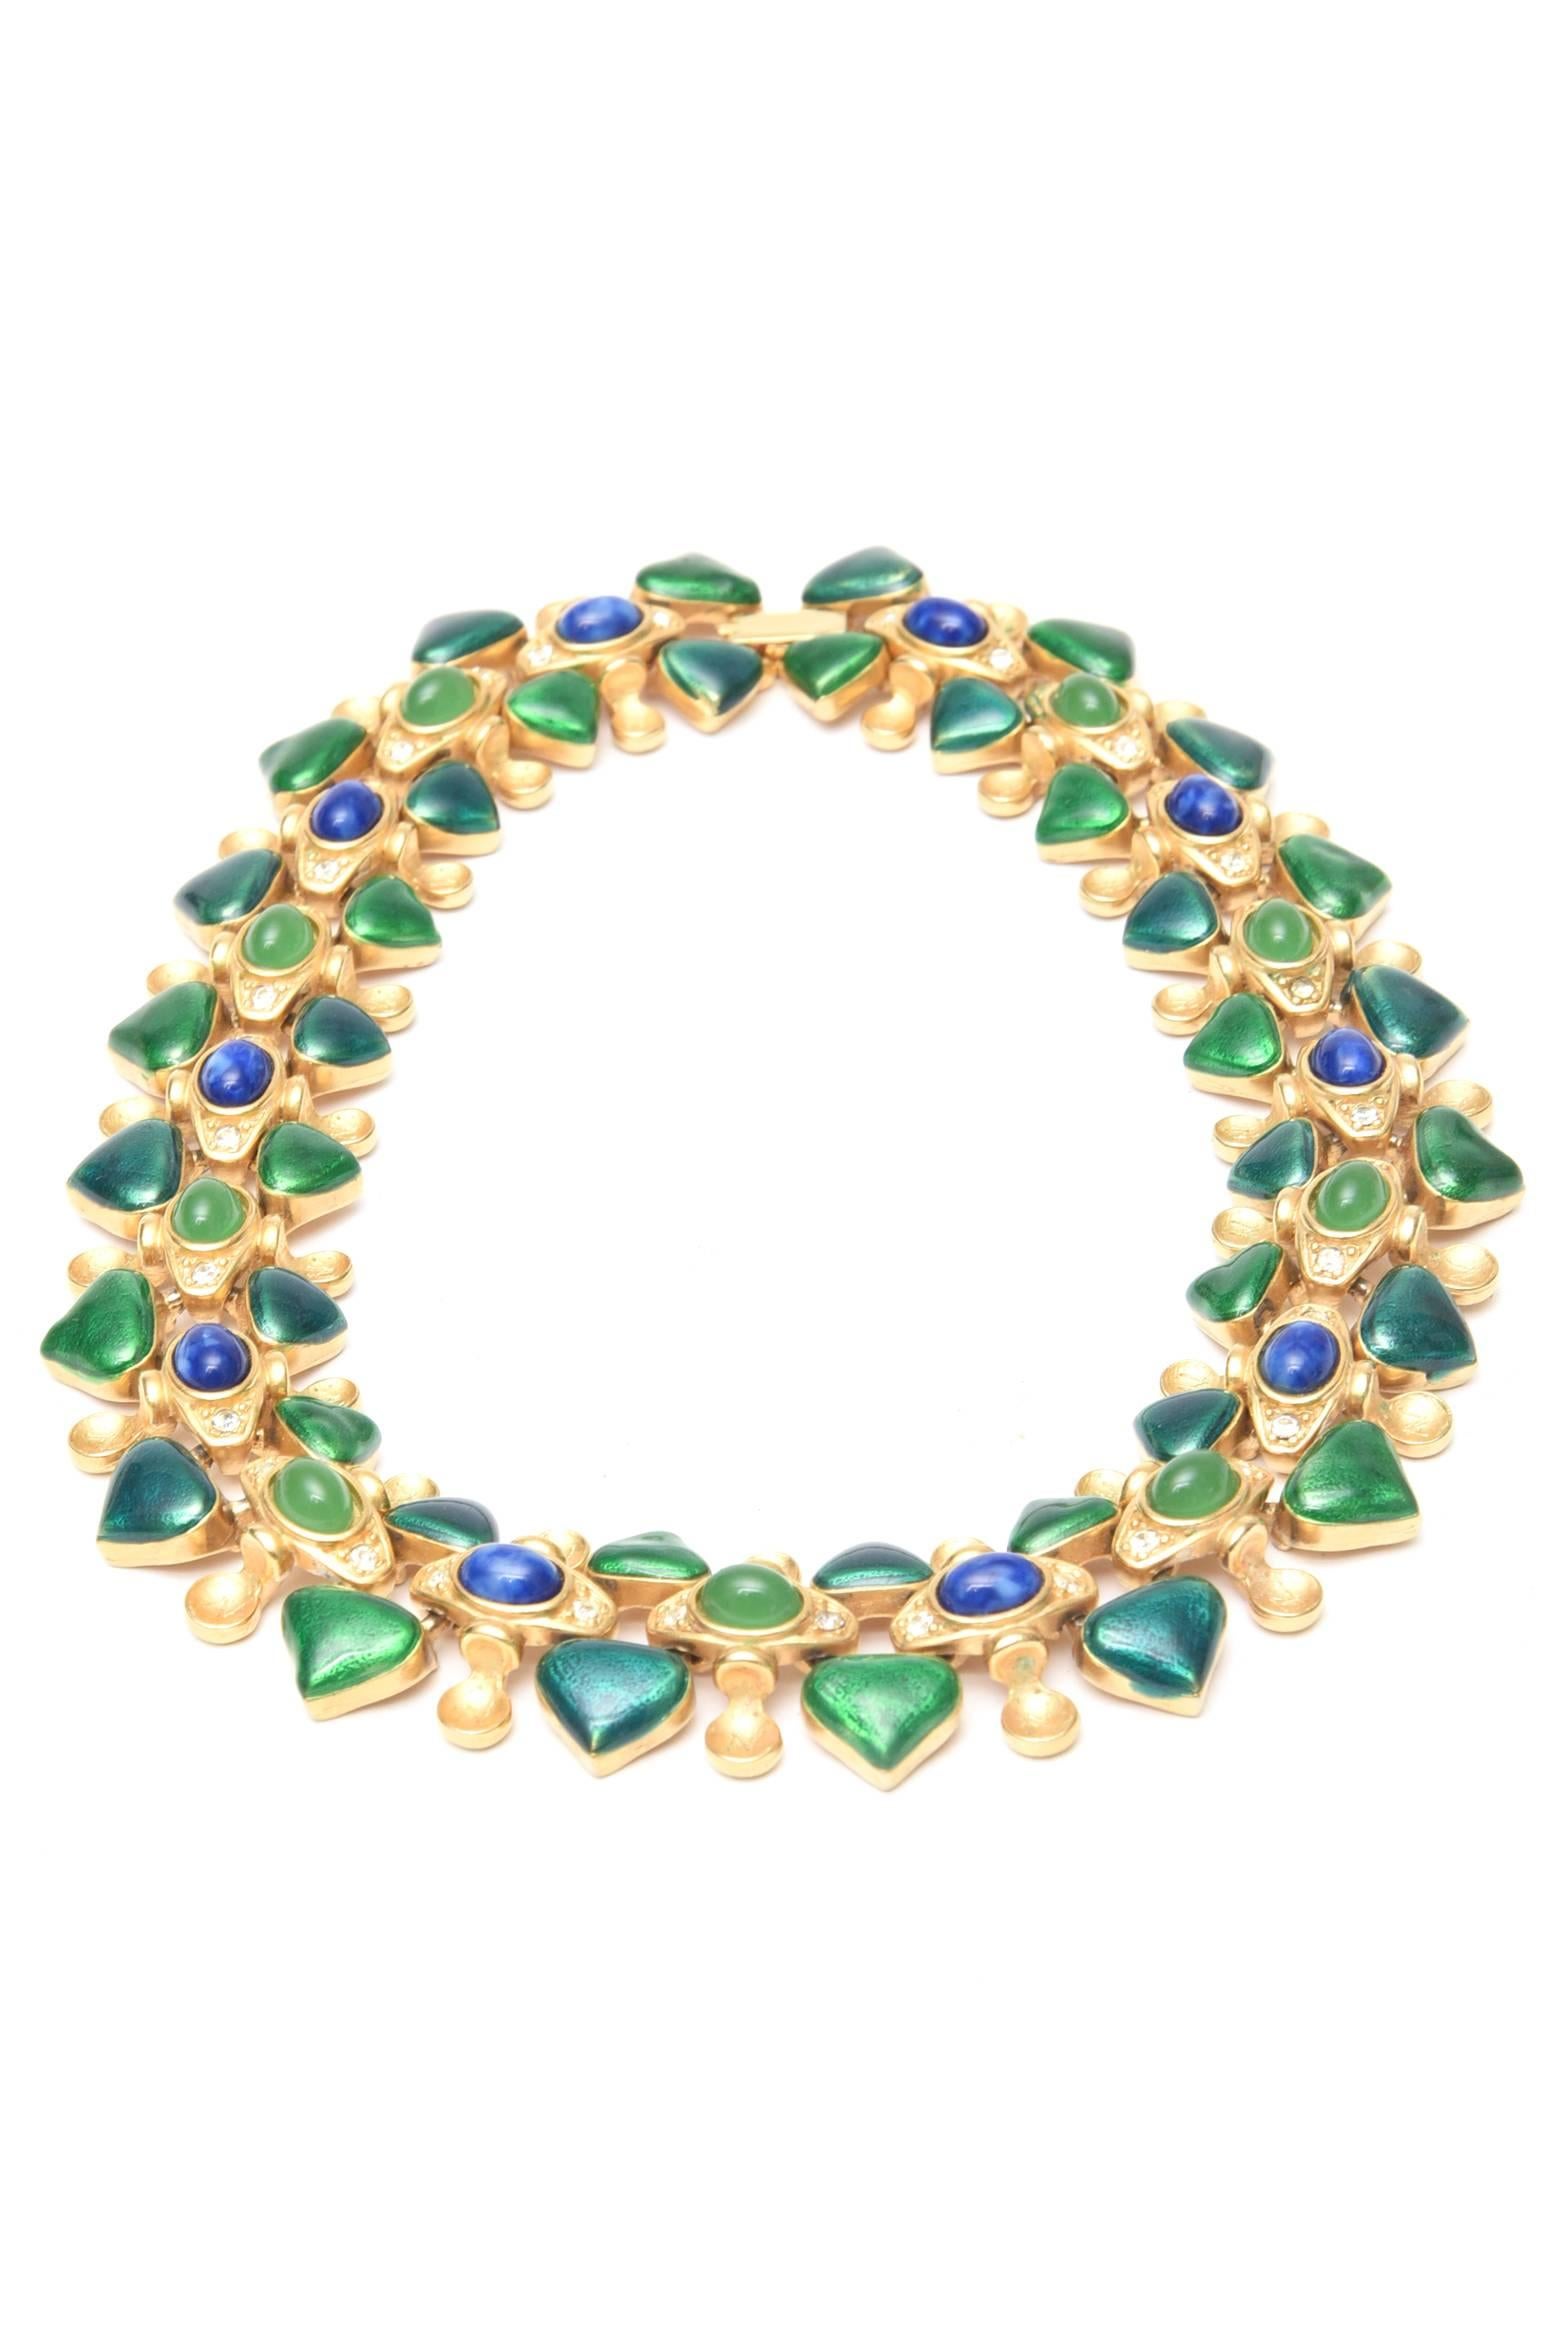 This wonderfully executed Necklace by Napier of the period. 
Tones of emerald green and royal blue.
This piece is very lush & luxe, and looks very regal when worn. 